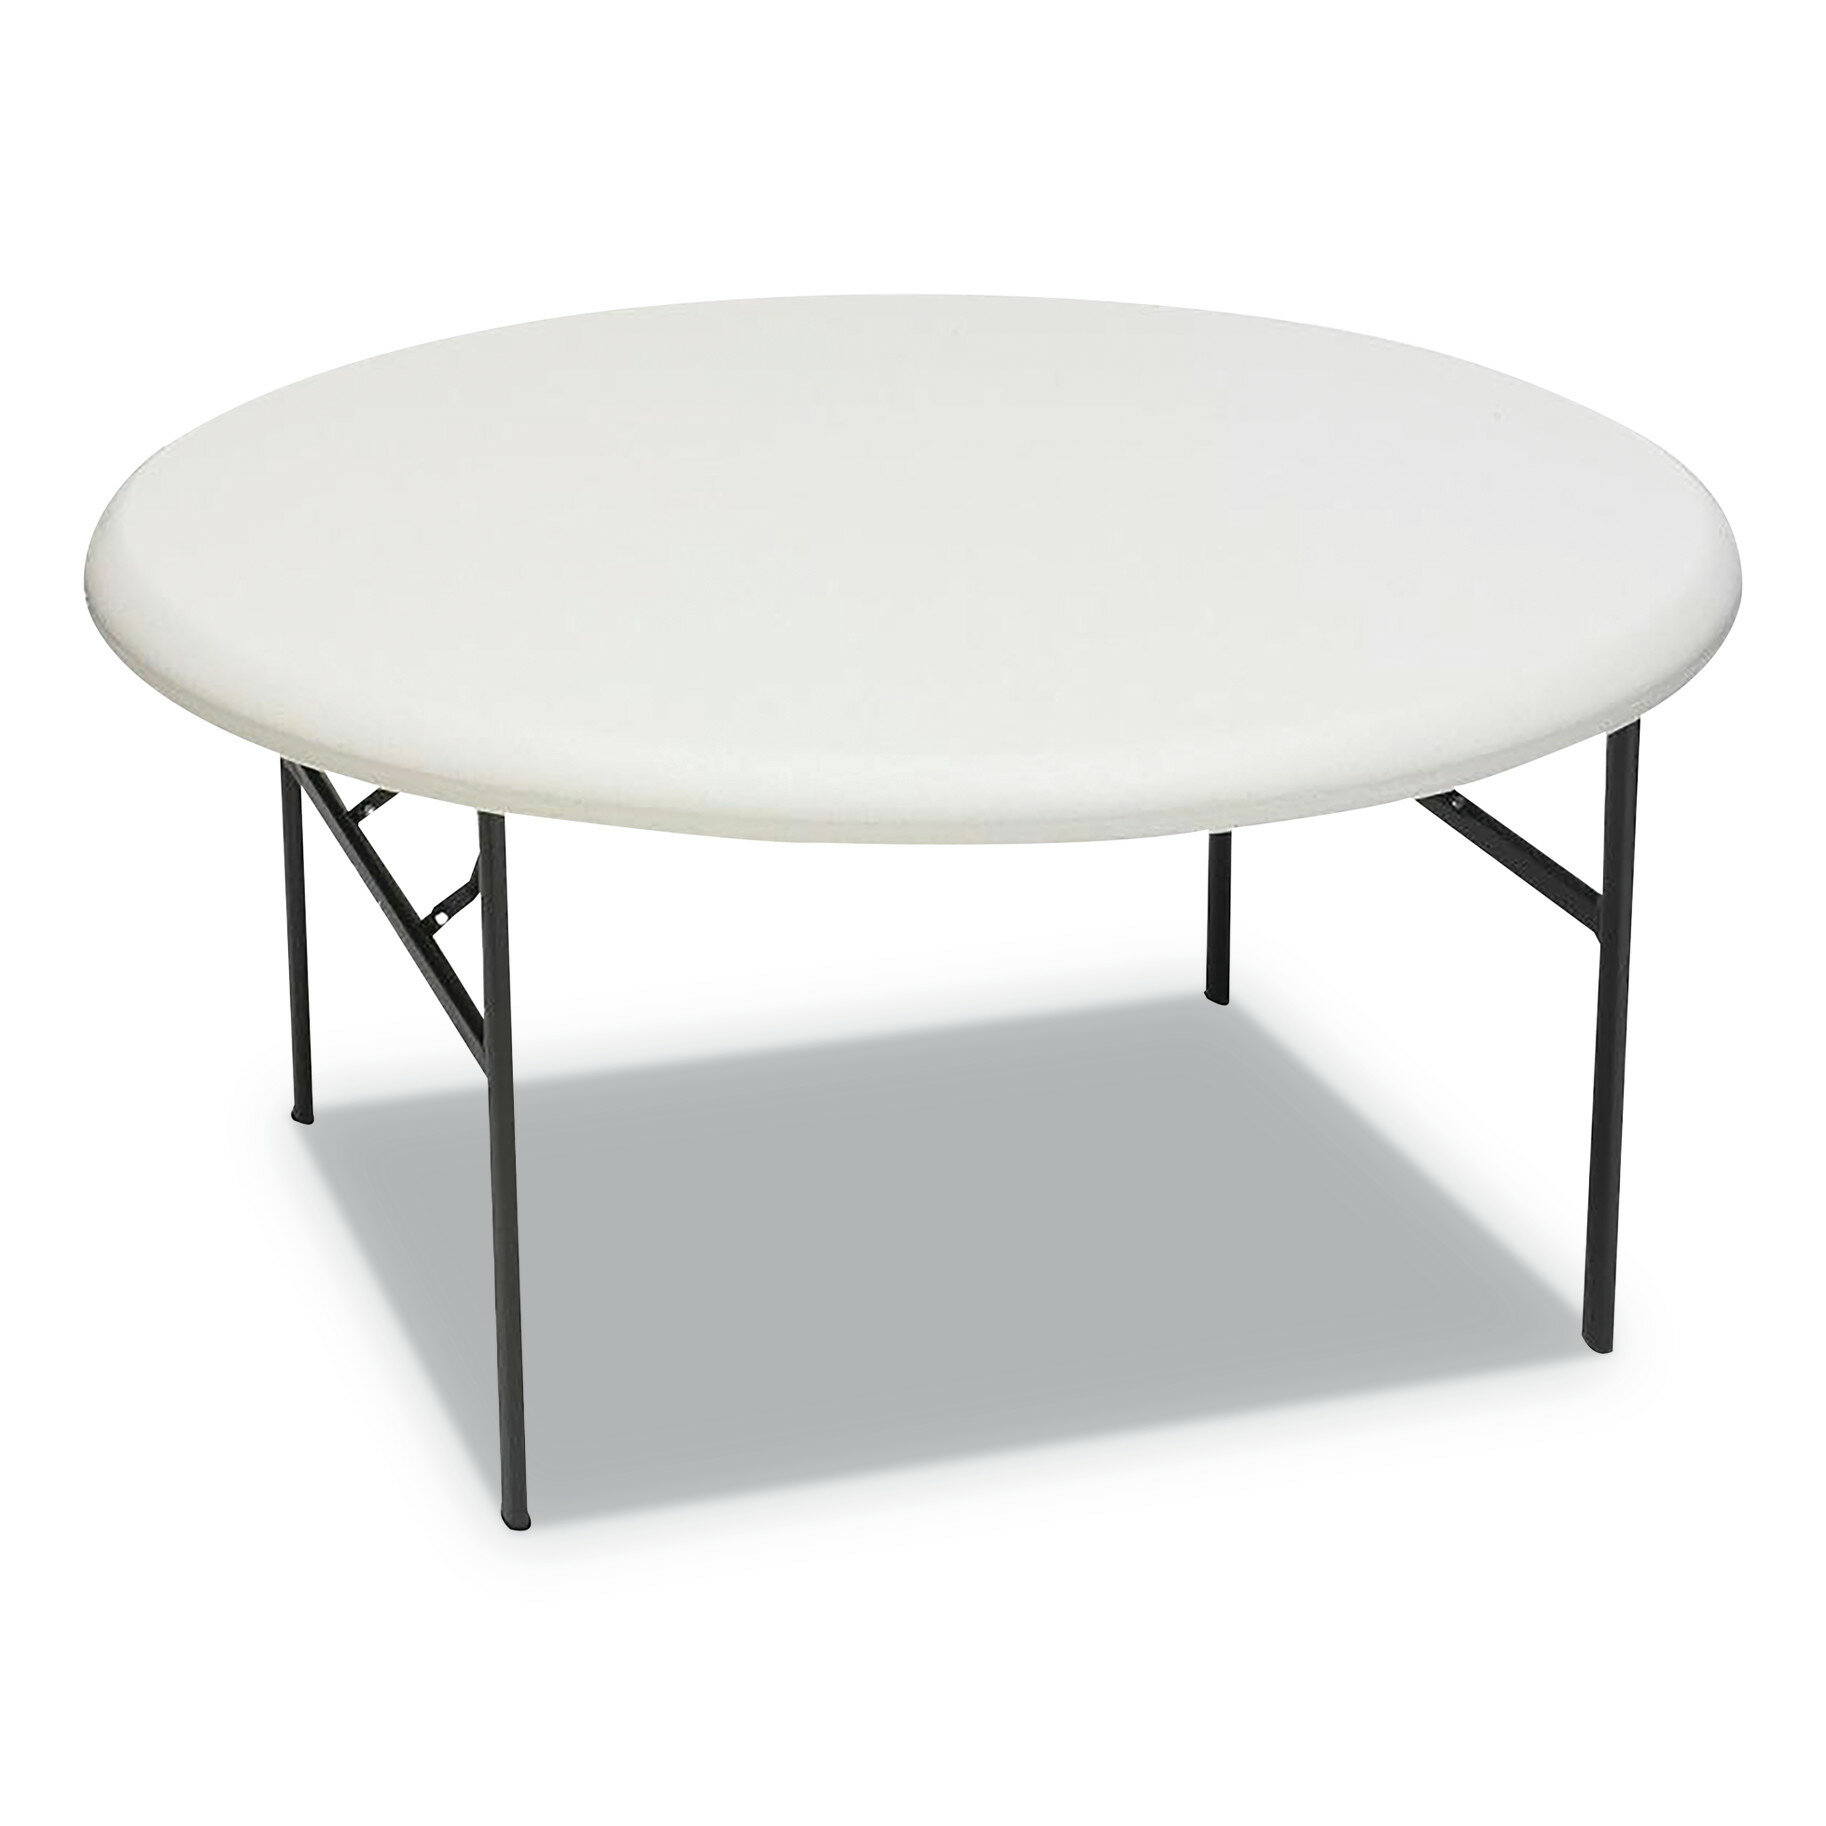 60 round patio tablecloth